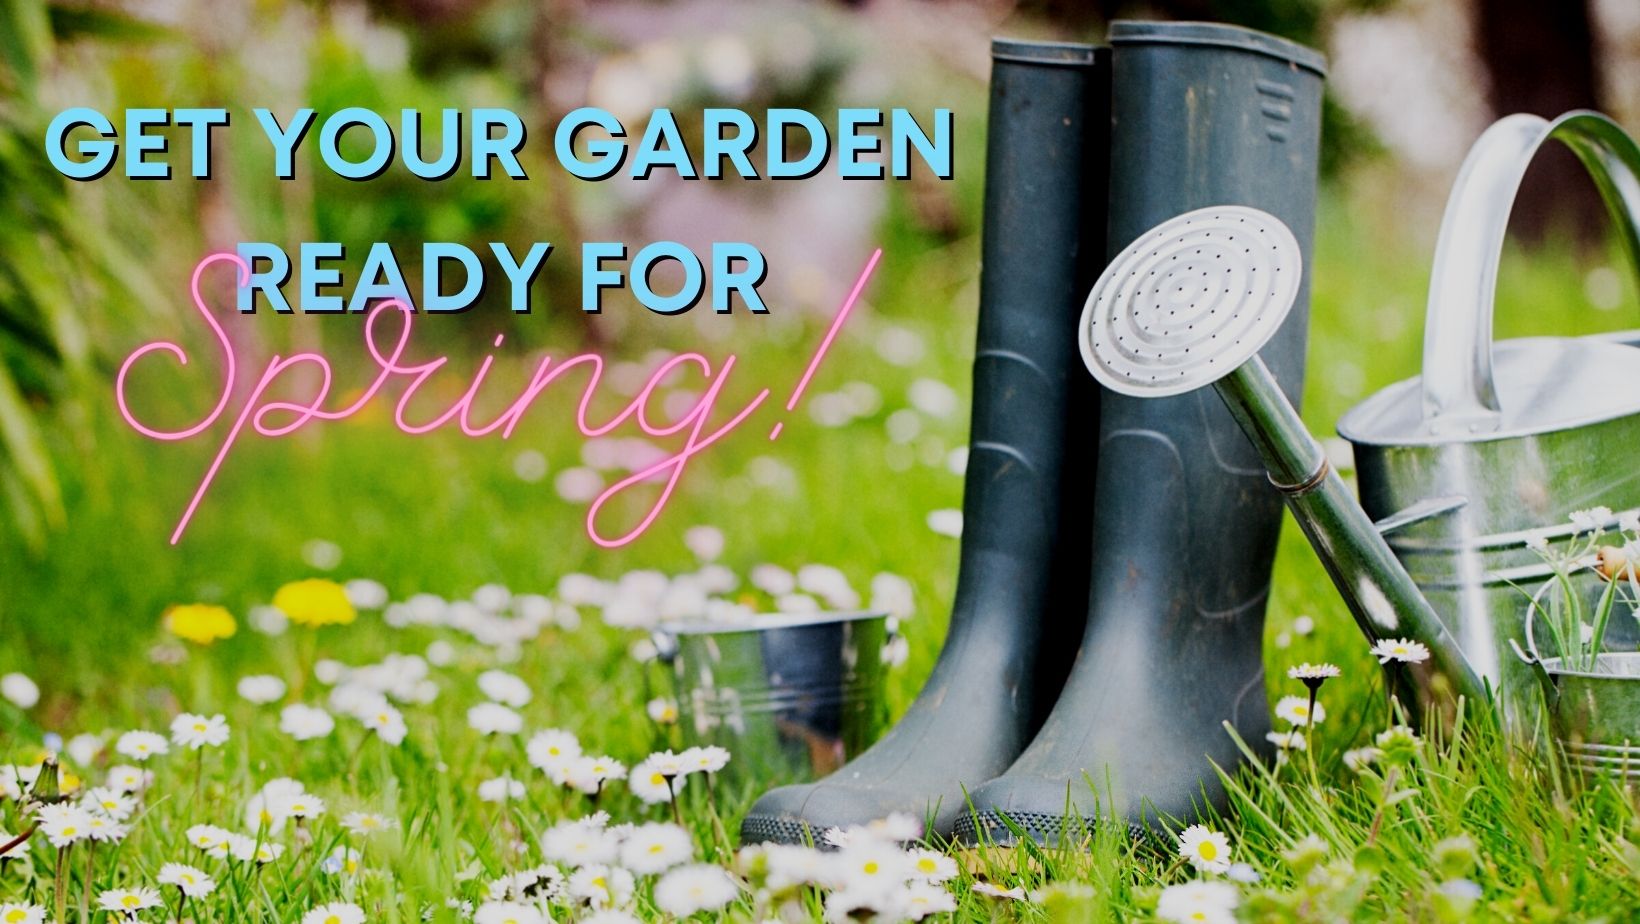 Get your garden ready for spring